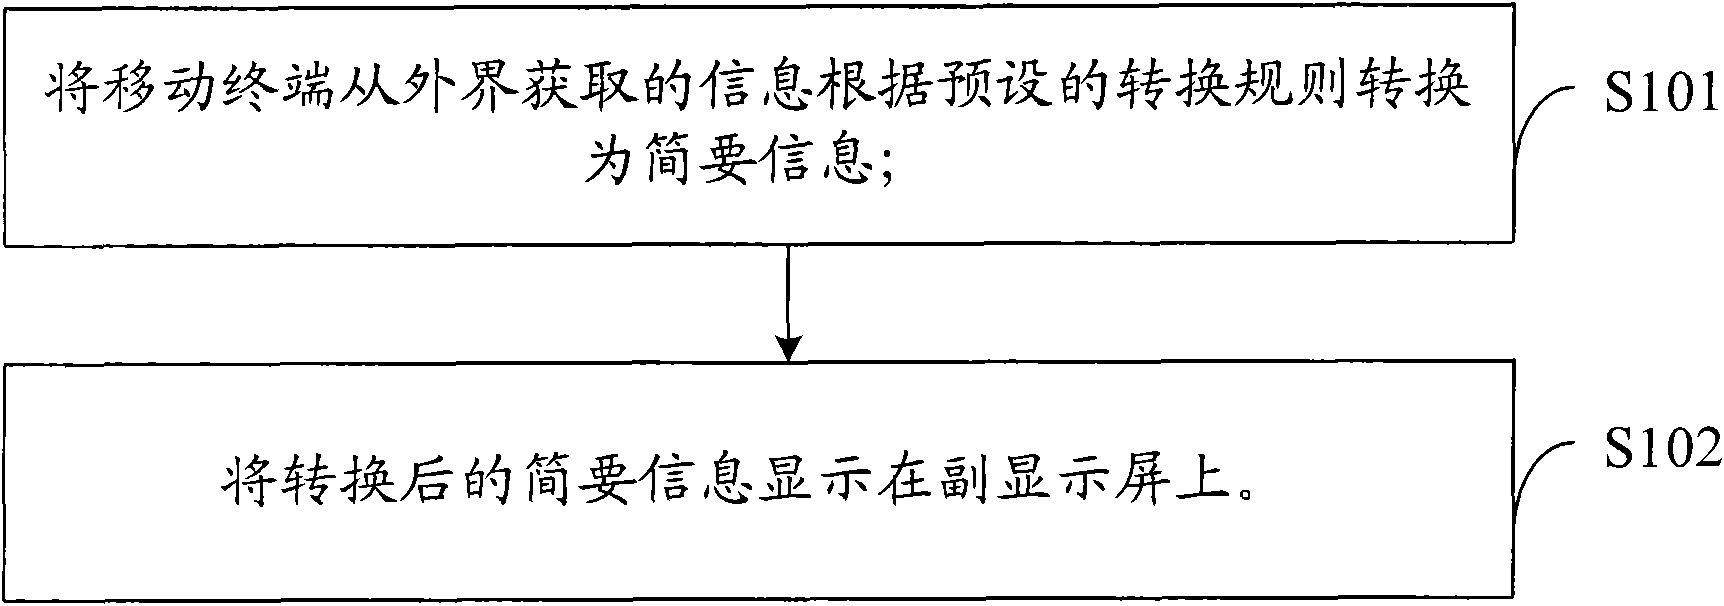 Method and system of switching information displayed on main display to slave display